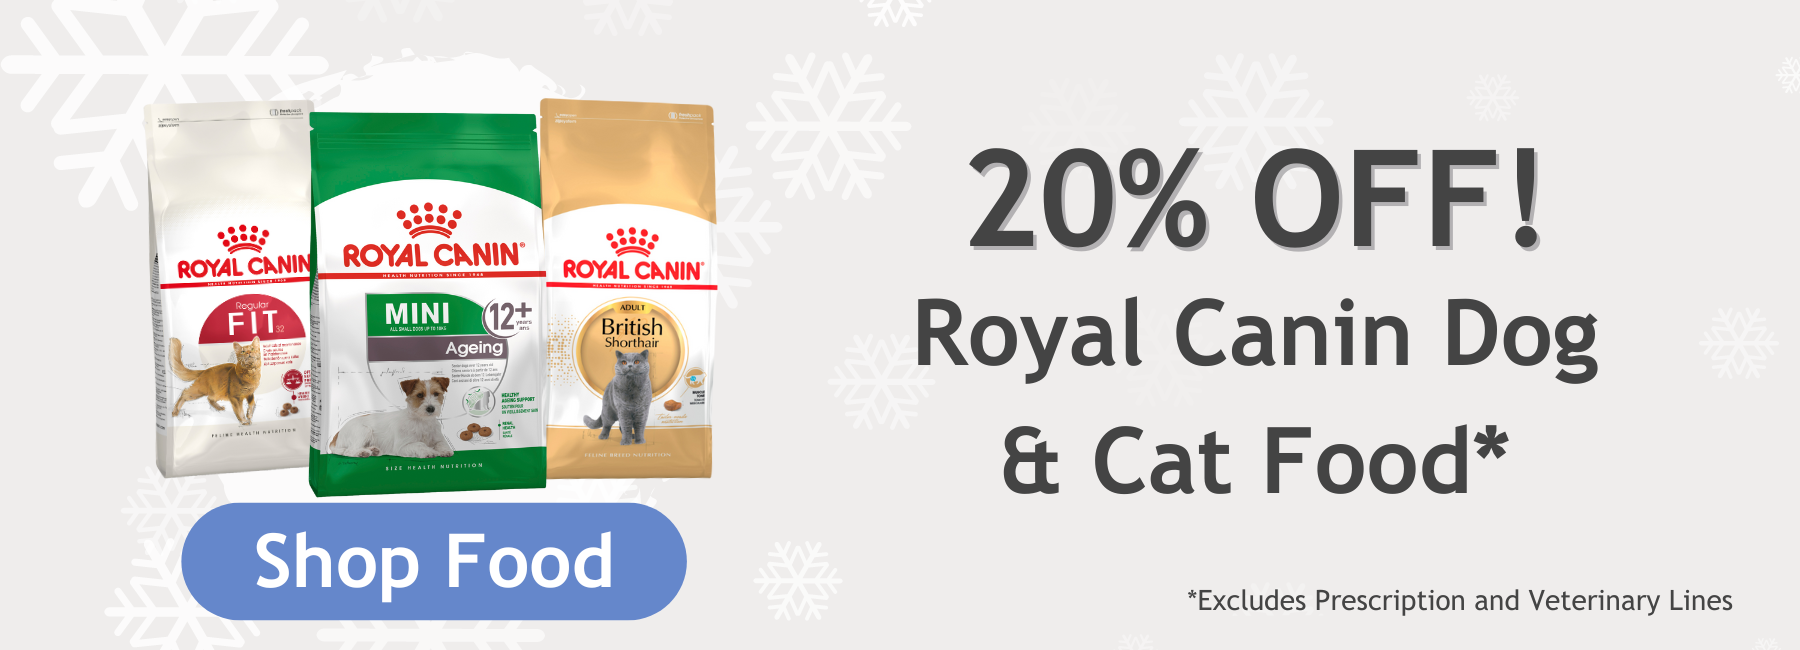 3 bags of royal canin including Fit, Mini Adult 12+ and British Shorthair to highlight promotion